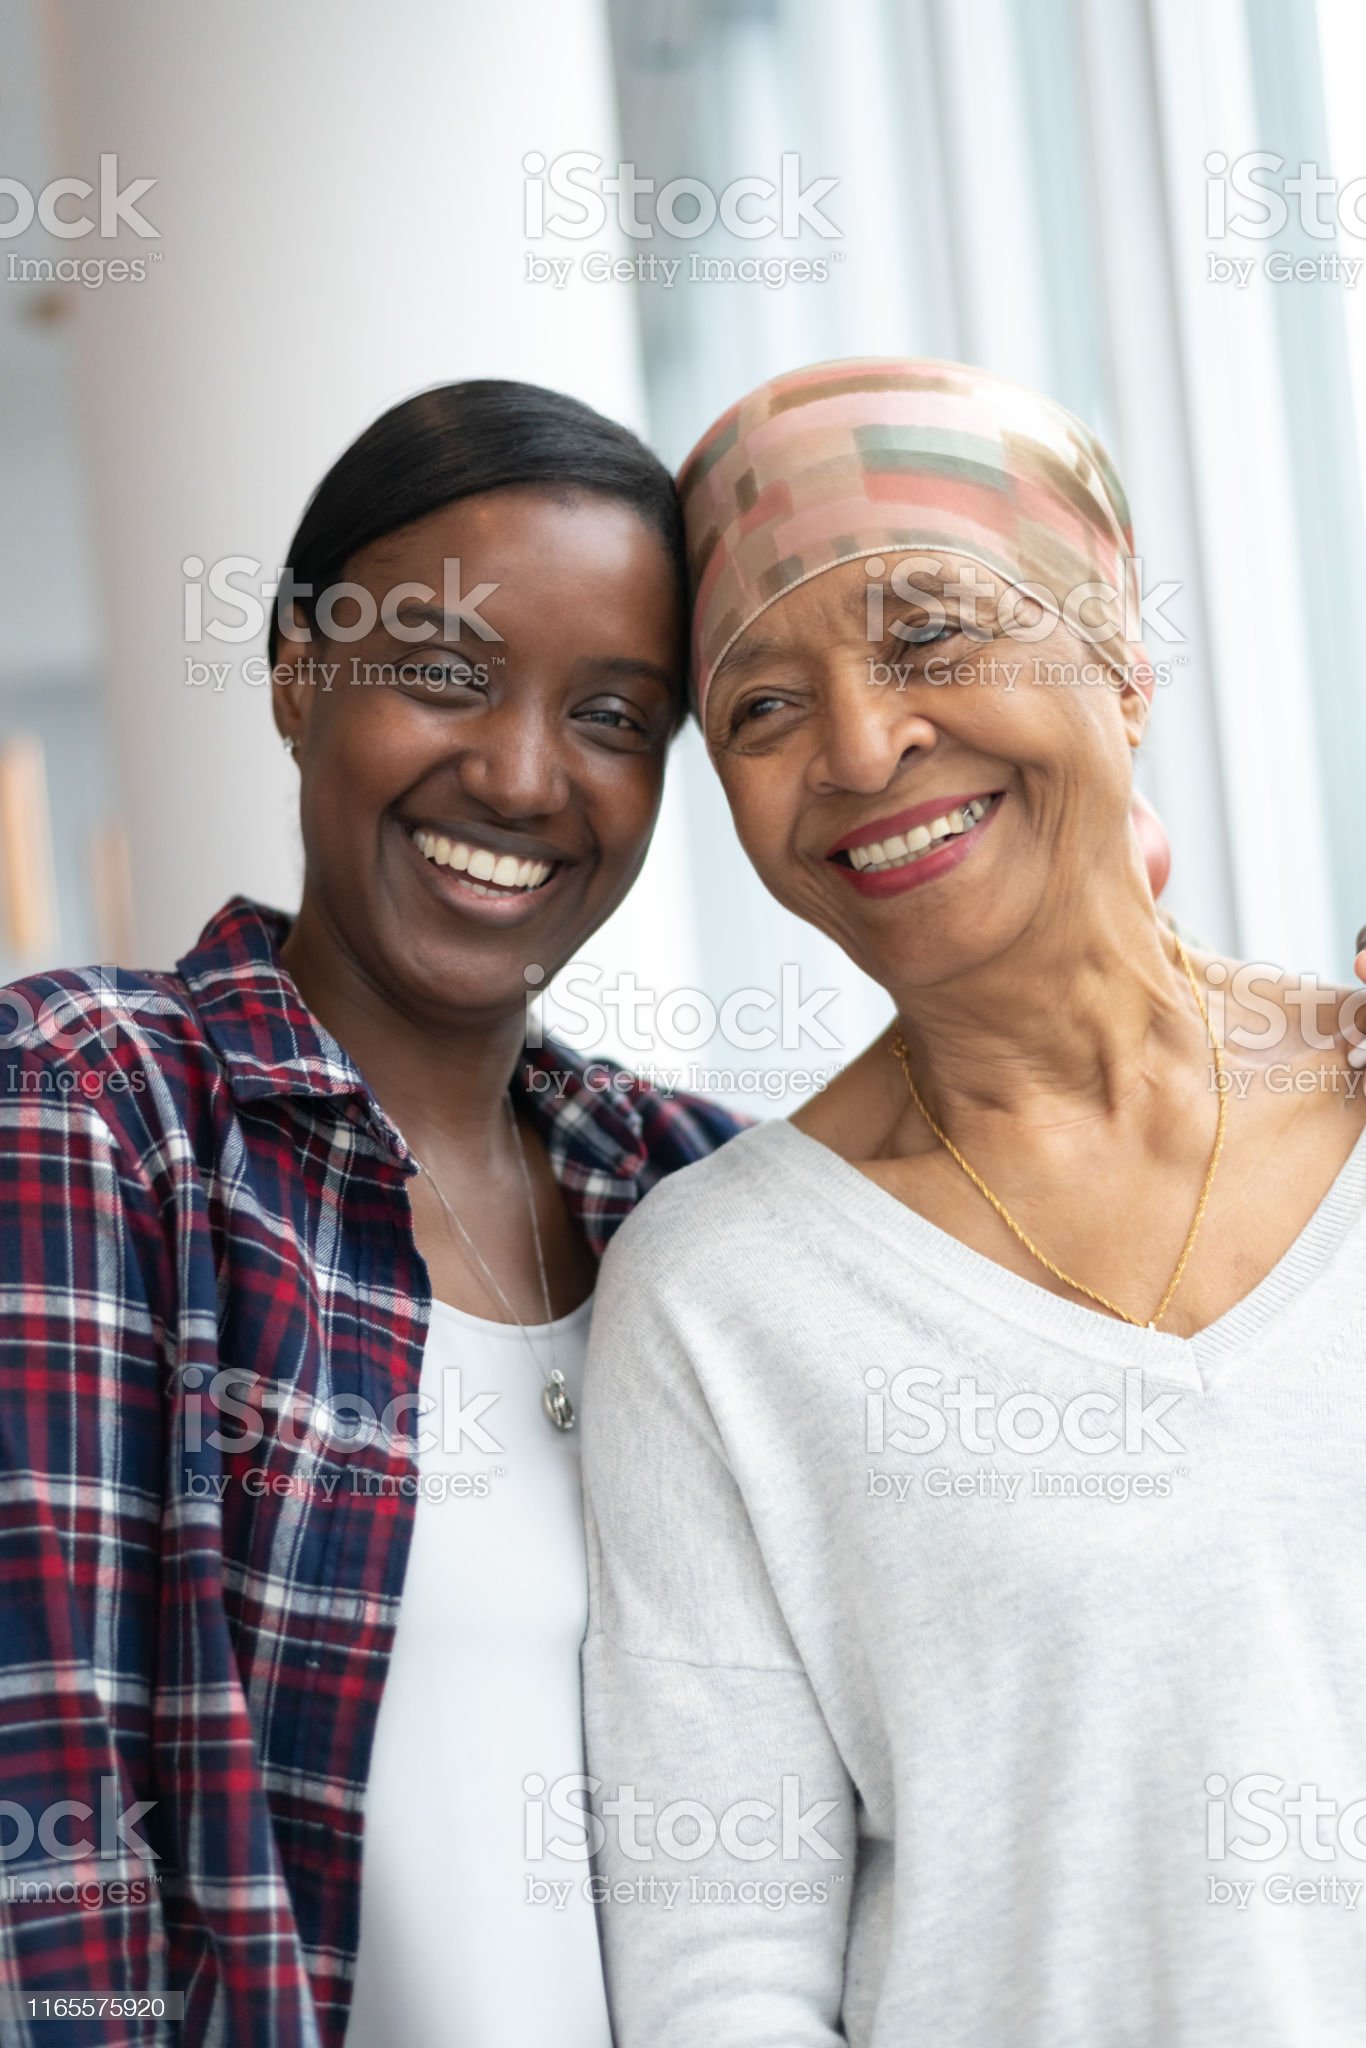 A senior African American woman with cancer stands near a large wall of windows. She is embracing her adult daughter. They are smiling while resting their foreheads against each other. The women are full of hope for the future.